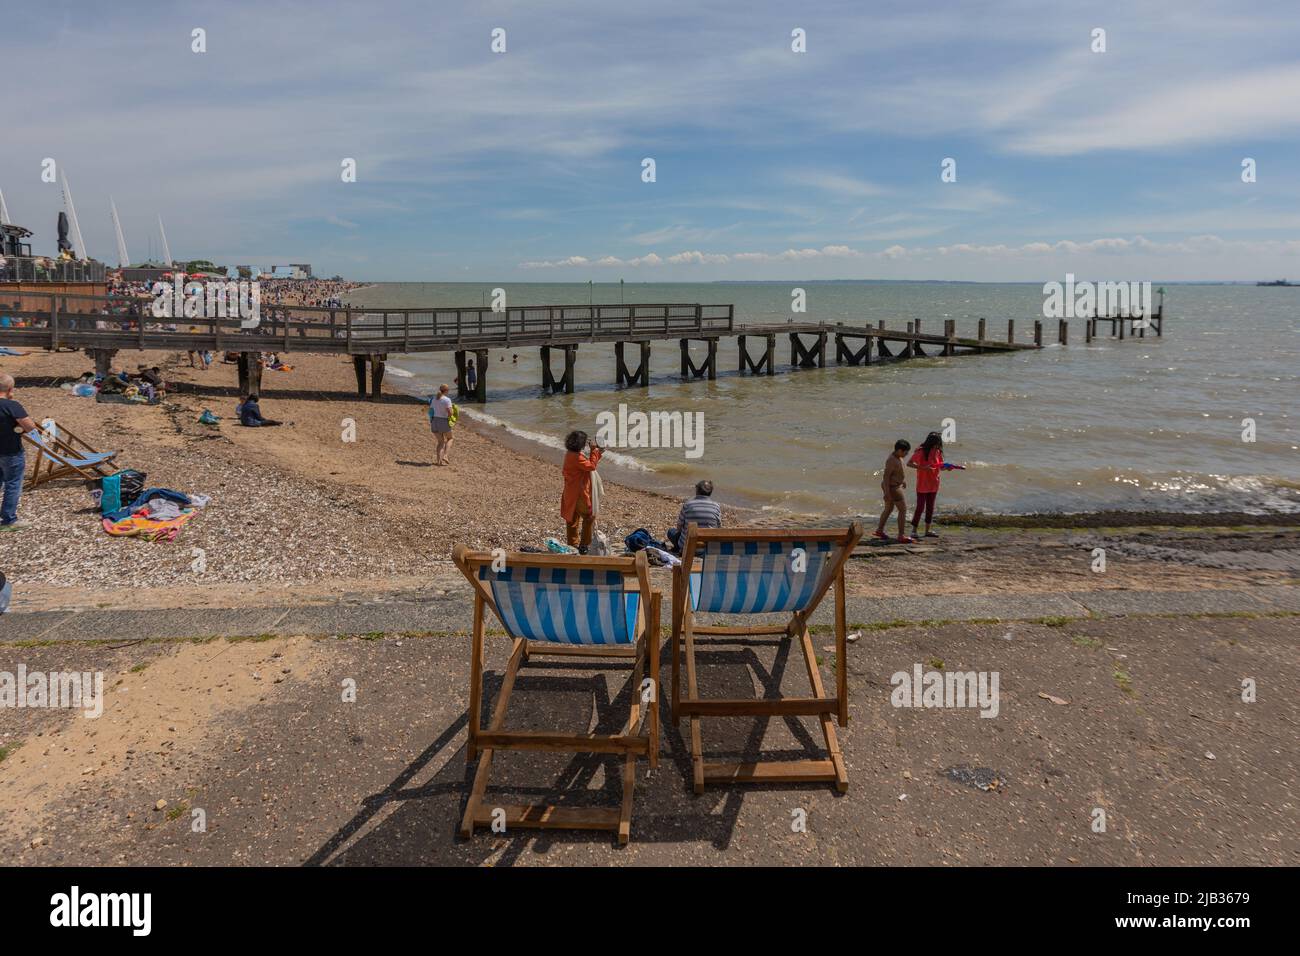 Southend on Sea, UK. 2nd Jun, 2022. Tourists come to Southend on Sea for the day to enjoy the bank holiday and take advantage of the warm weather. Penelope Barritt/Alamy Live News Stock Photo